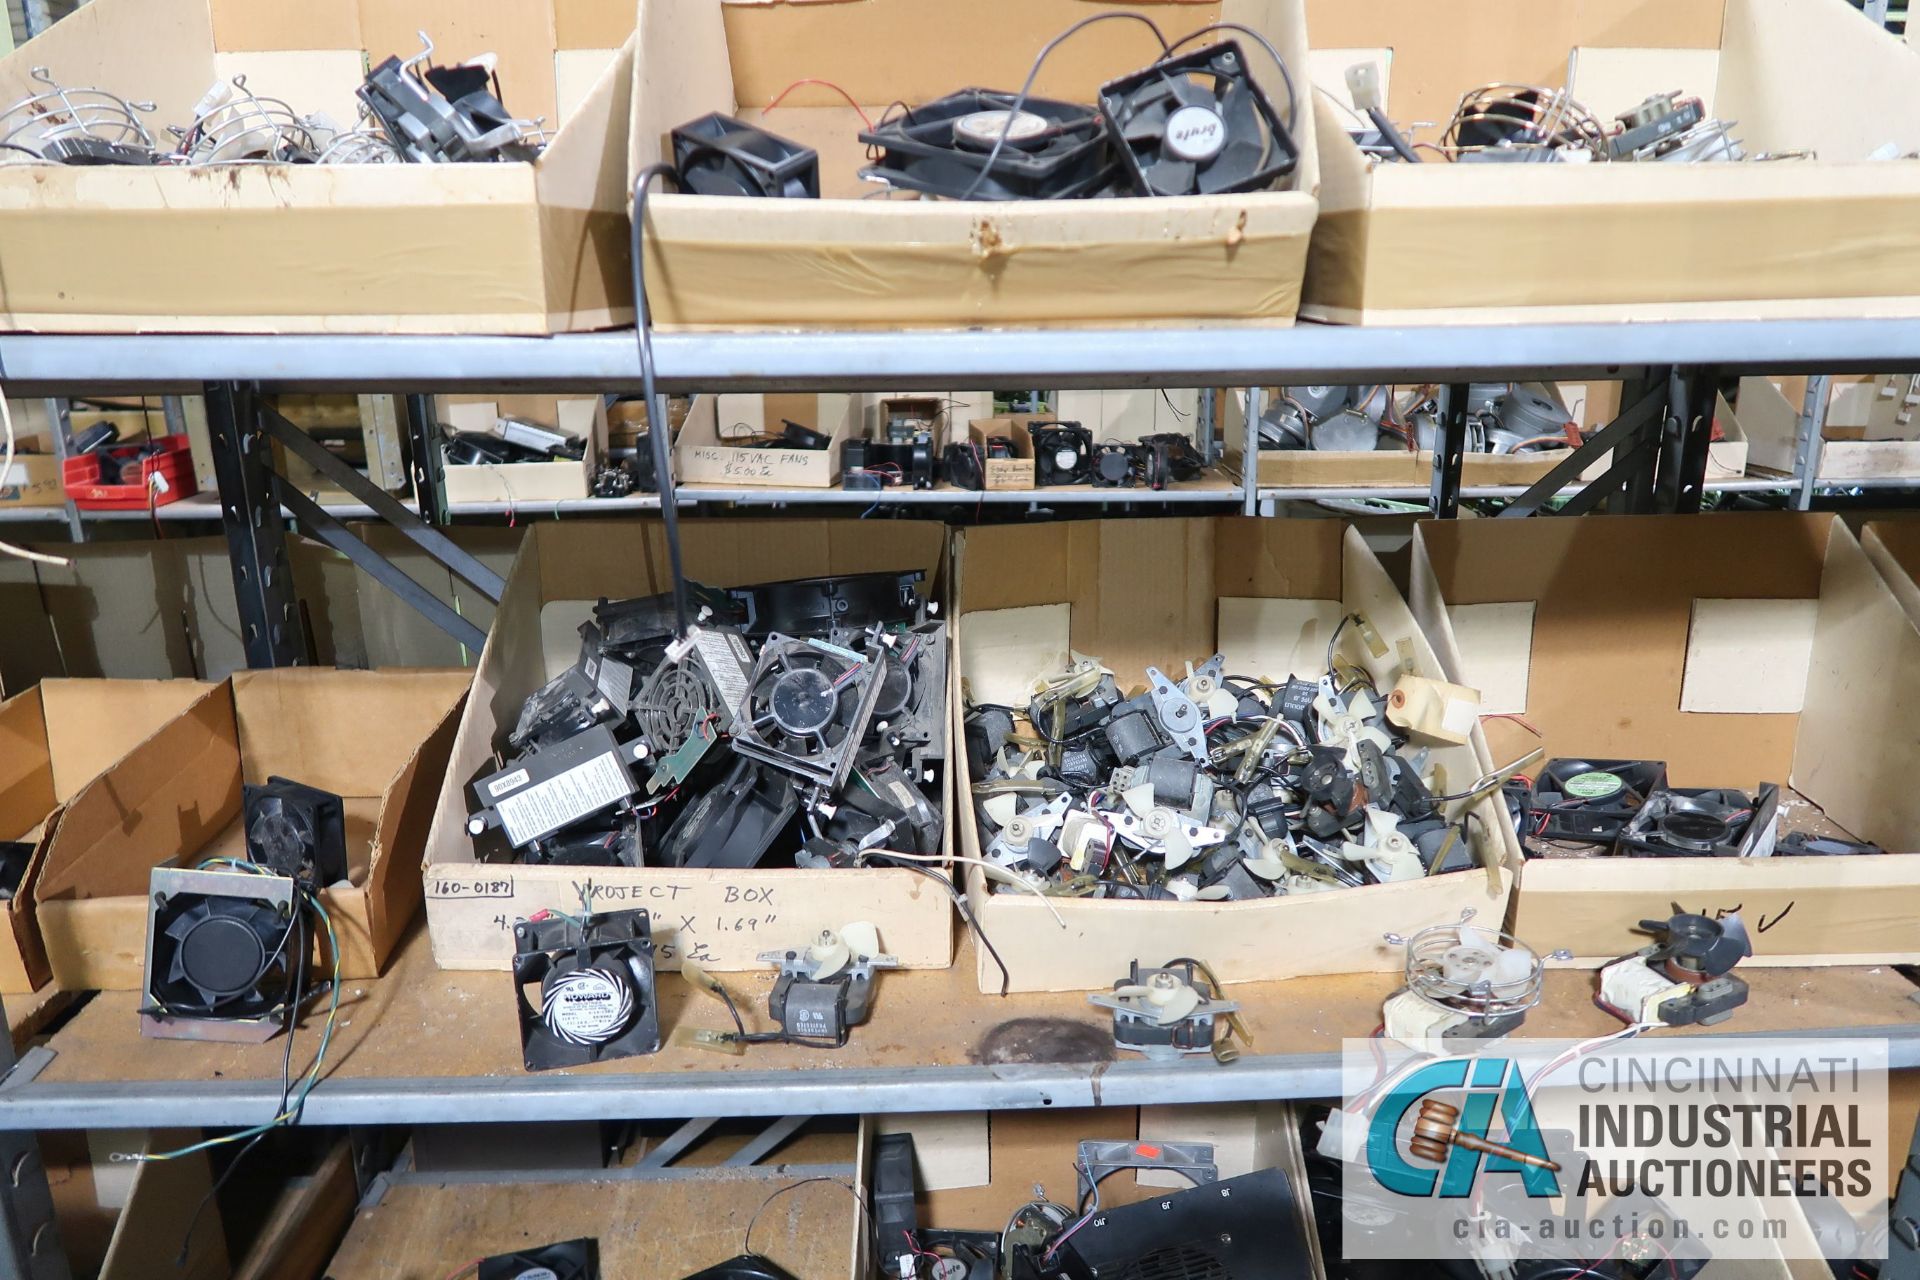 (LOT) LARGE QUANTITY OF COMPUTER FANS OF ALL SIZES ON (7) SECTIONS SHELVING - Image 11 of 21